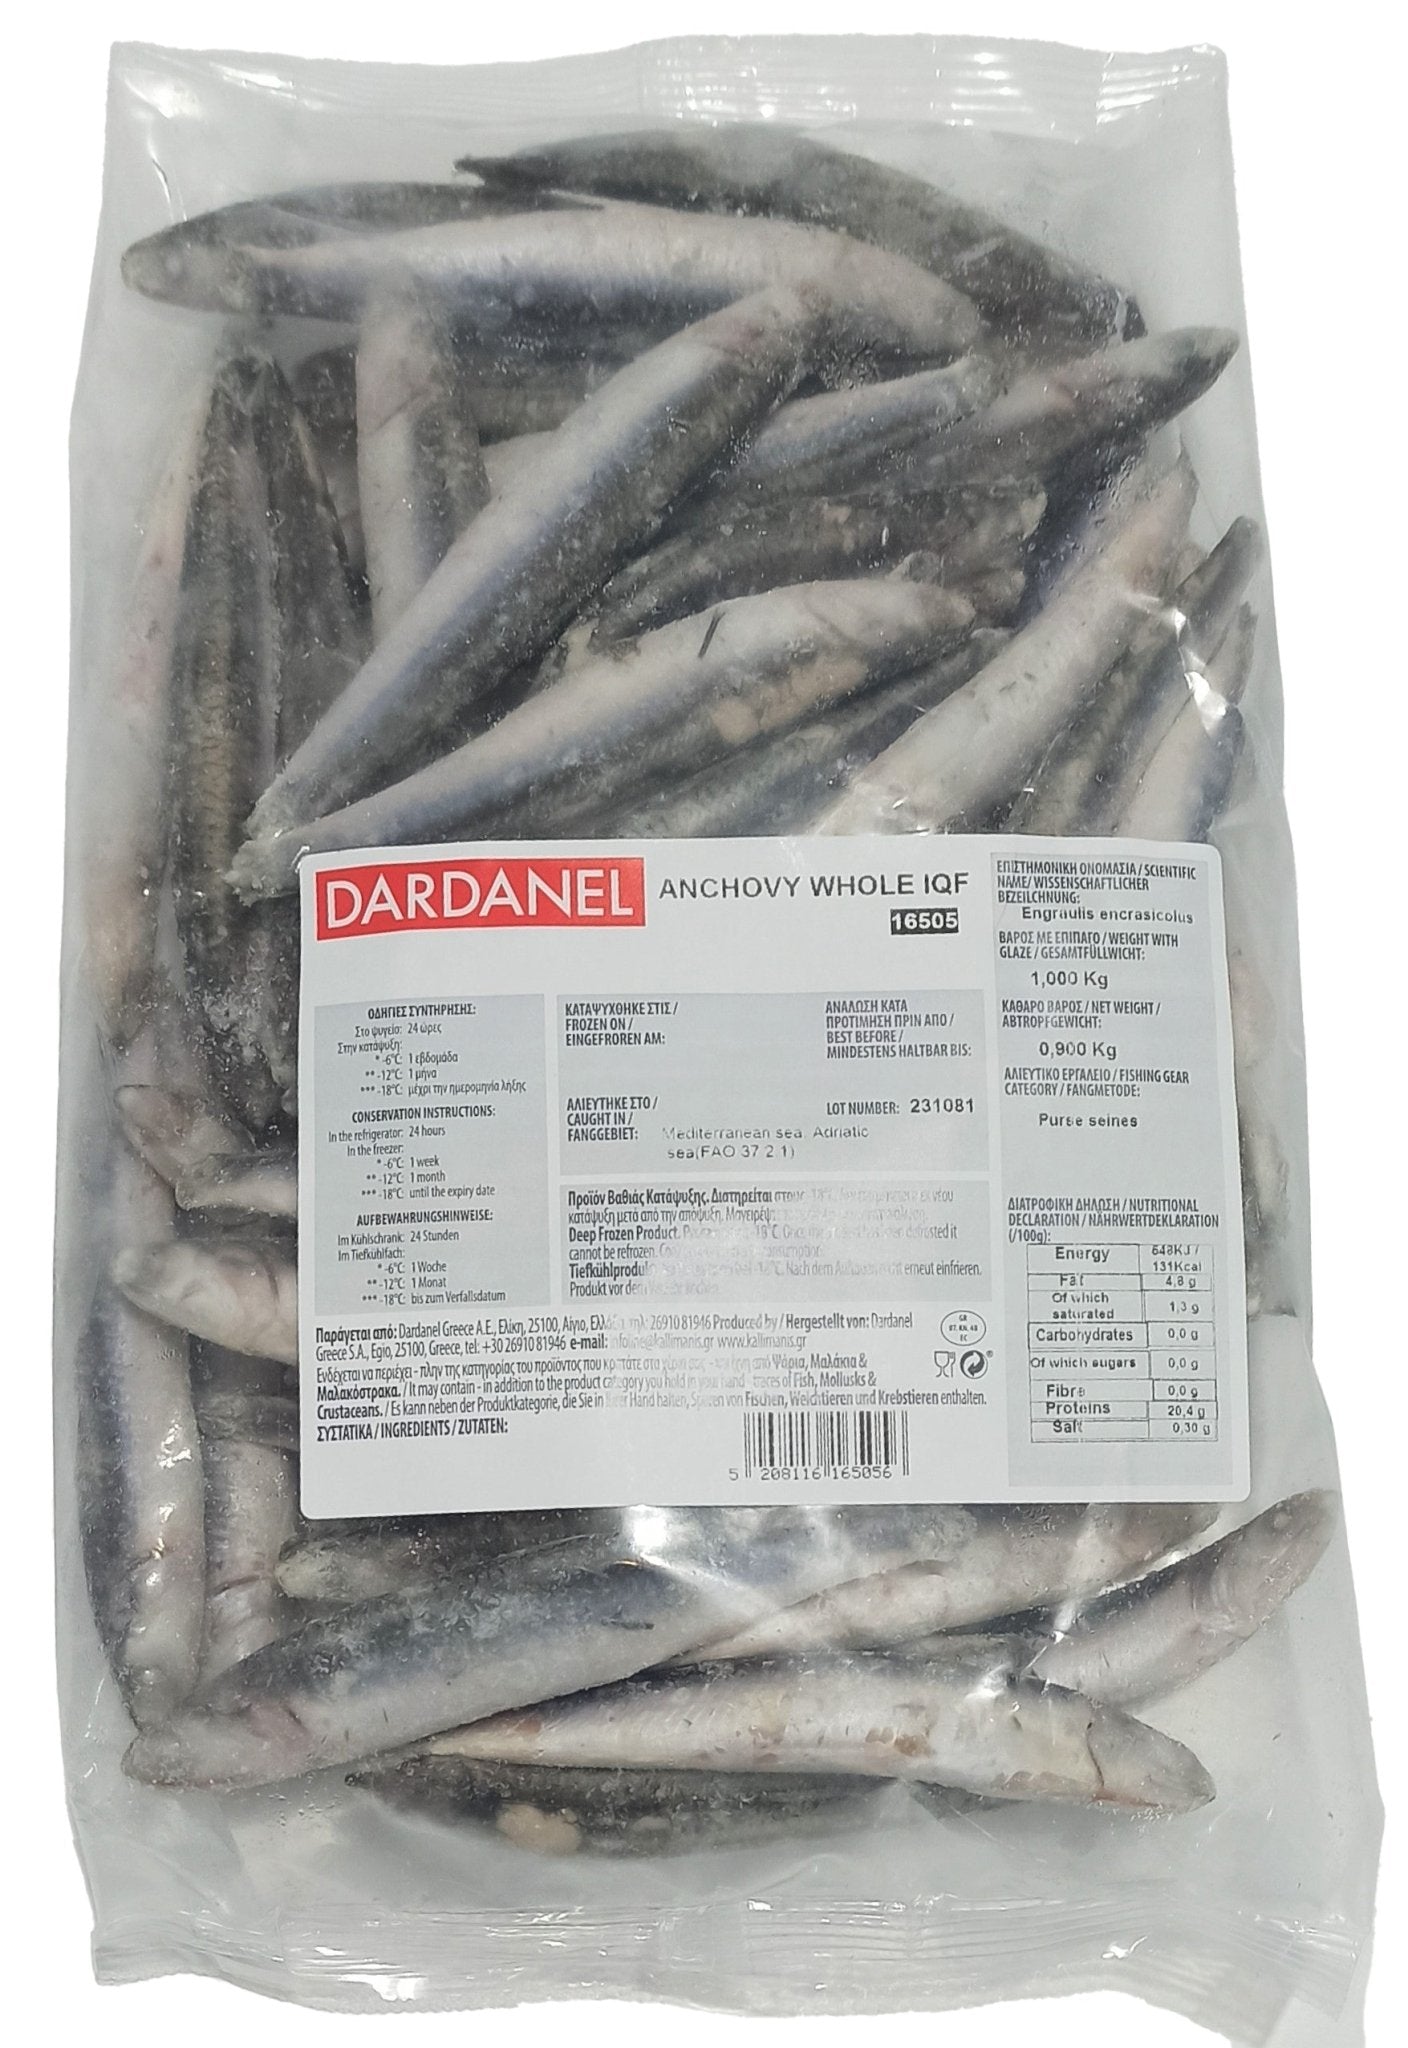 Dardanel Anchovy Whole IQF (1KG) - Aytac Foods